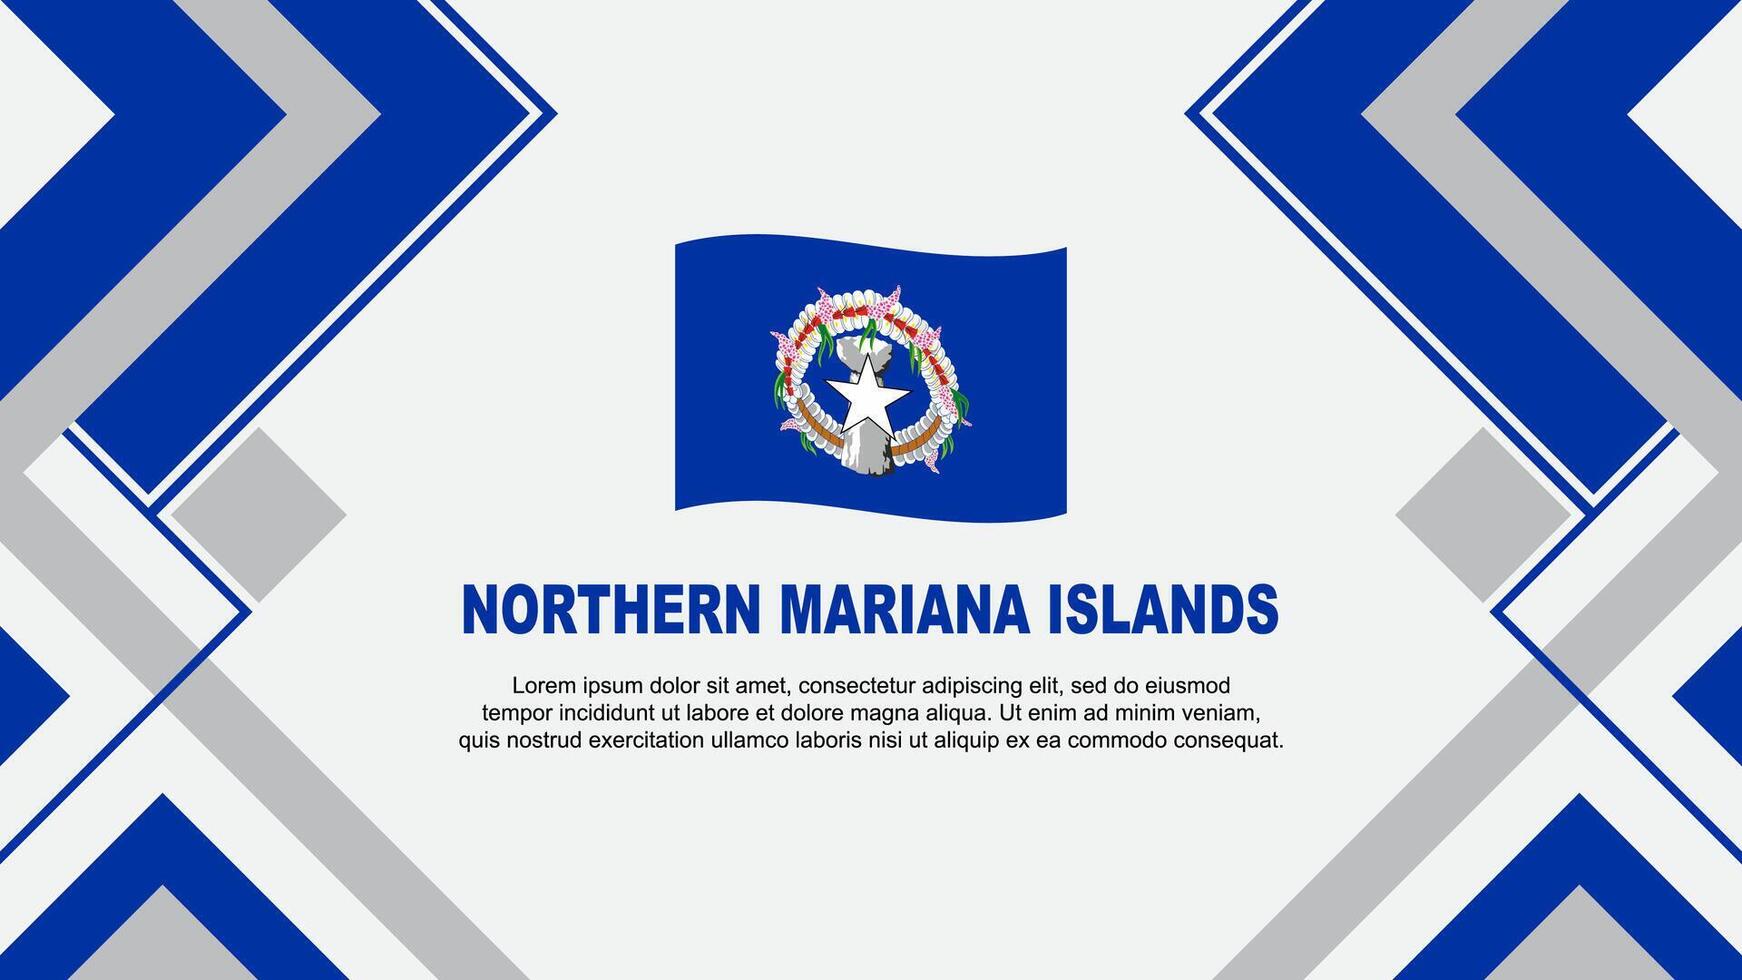 Northern Mariana Islands Flag Abstract Background Design Template. Northern Mariana Islands Independence Day Banner Wallpaper Vector Illustration. Banner